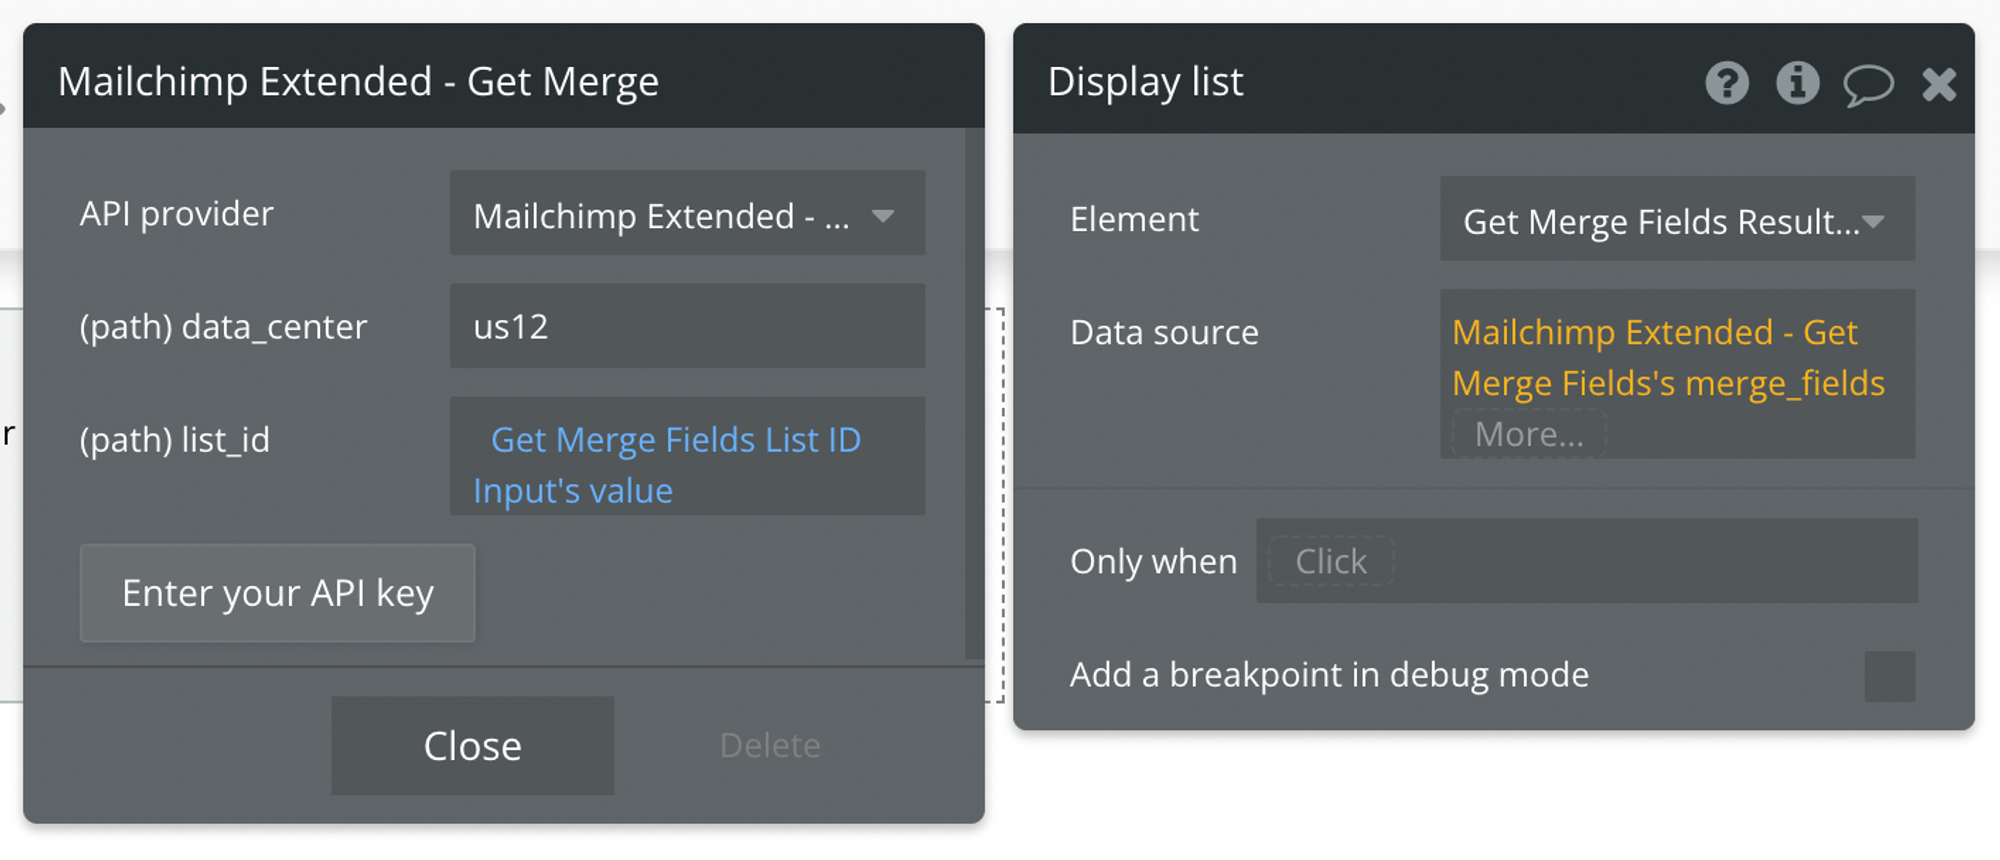 Select Mailchimp Extended - Get Merge Fields's merge_fields for the data source